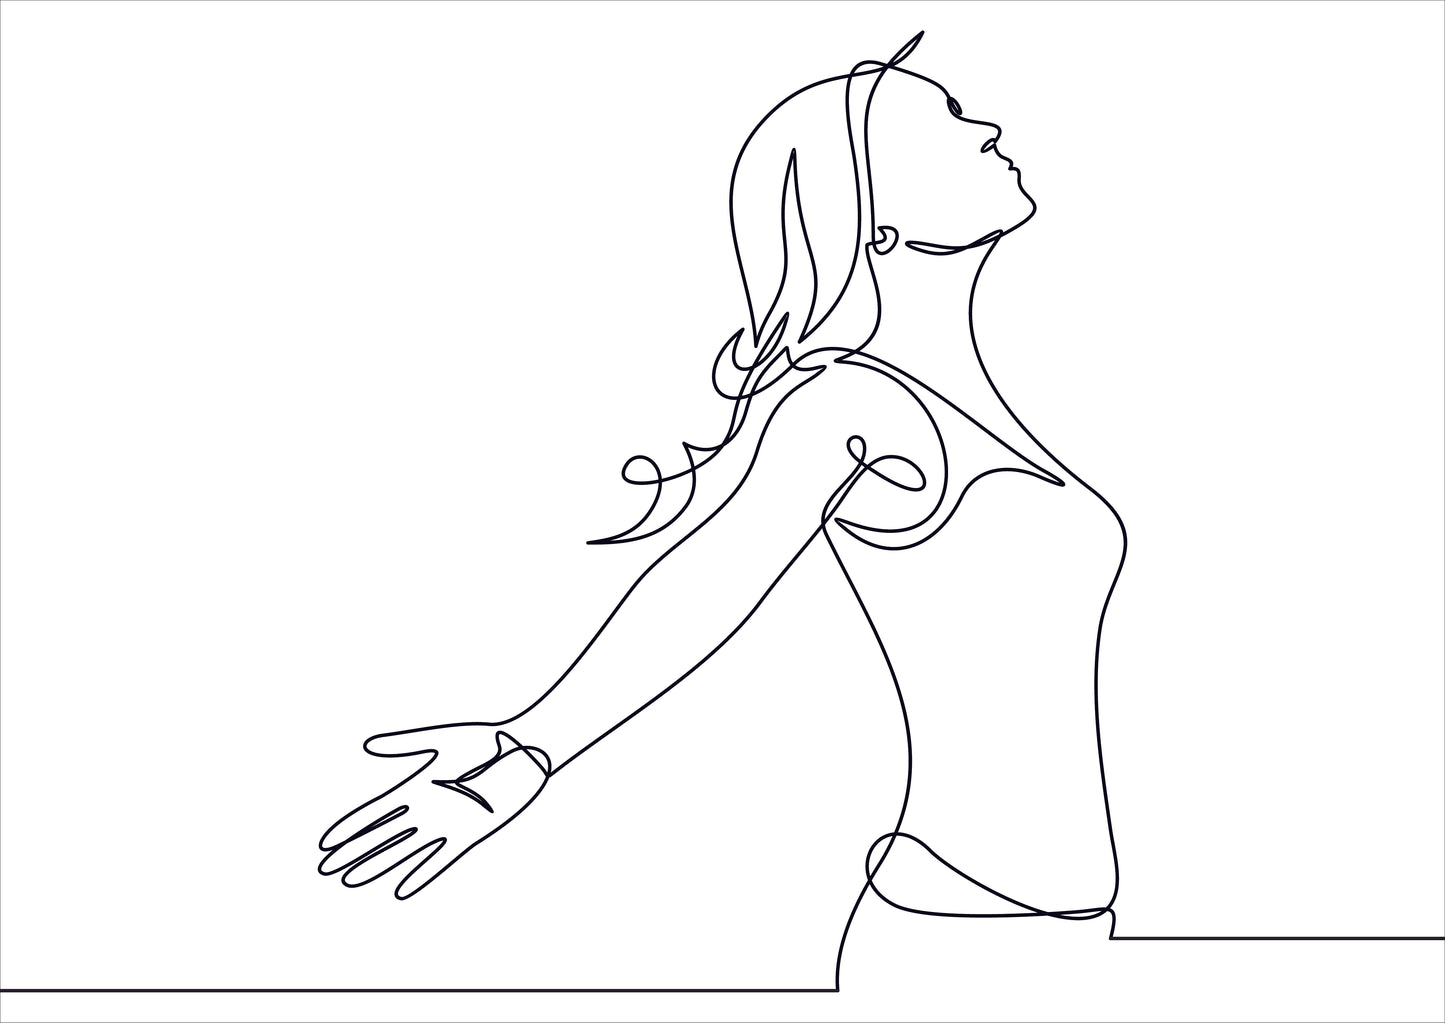 Woman stretching arms